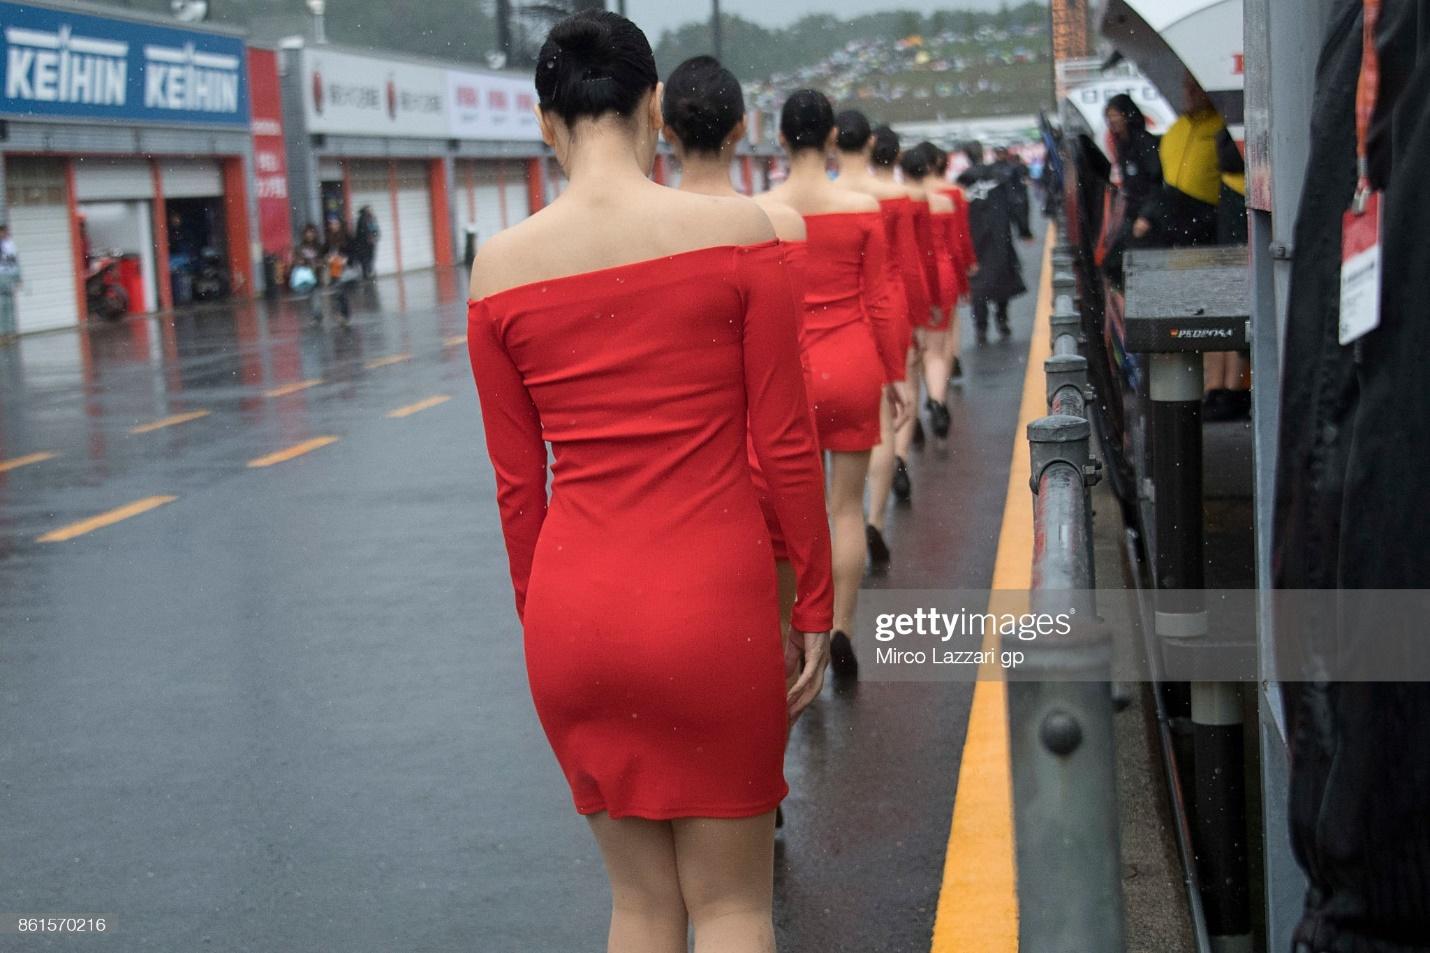 D:\Documenti\posts\posts\Women and motorsport\foto\Getty e altre\the-grid-girl-walk-in-pit-during-the-moto2-race-during-the-motogp-of-picture-id861570216.jpg